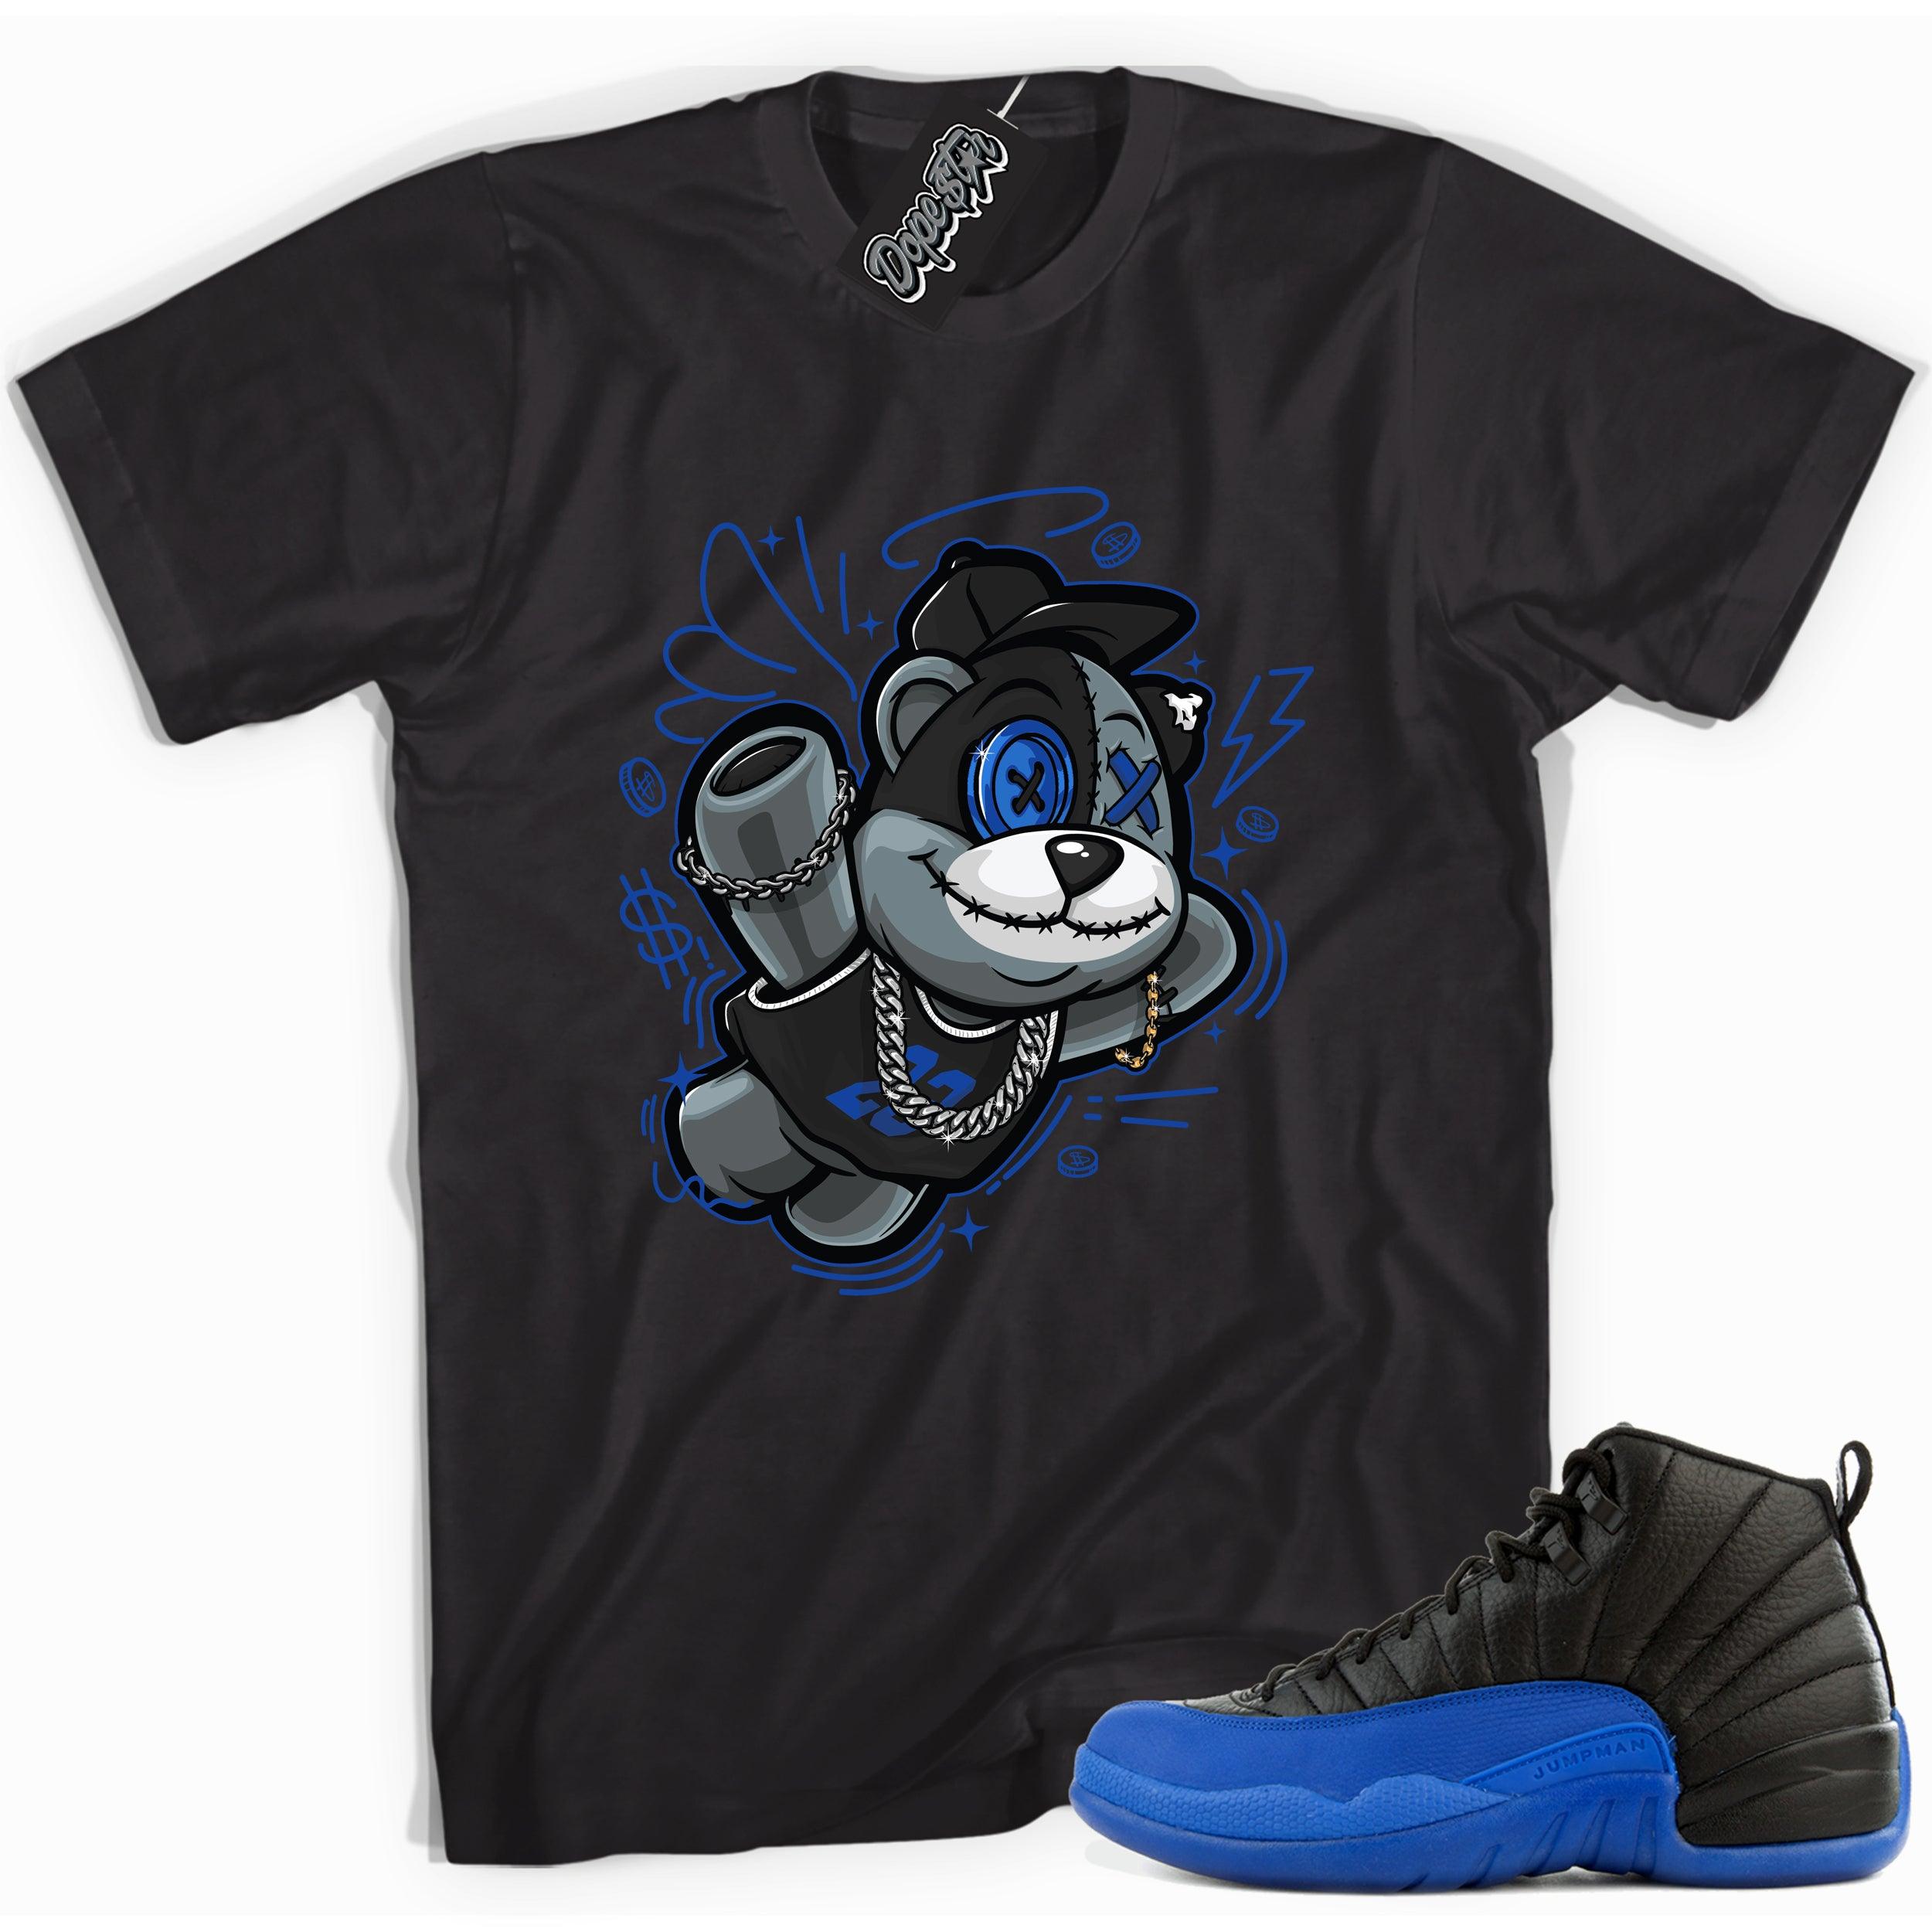 Cool black graphic tee with 'slam dunk bear' print, that perfectly matches  Air Jordan 12 Retro Black Game Royal sneakers.